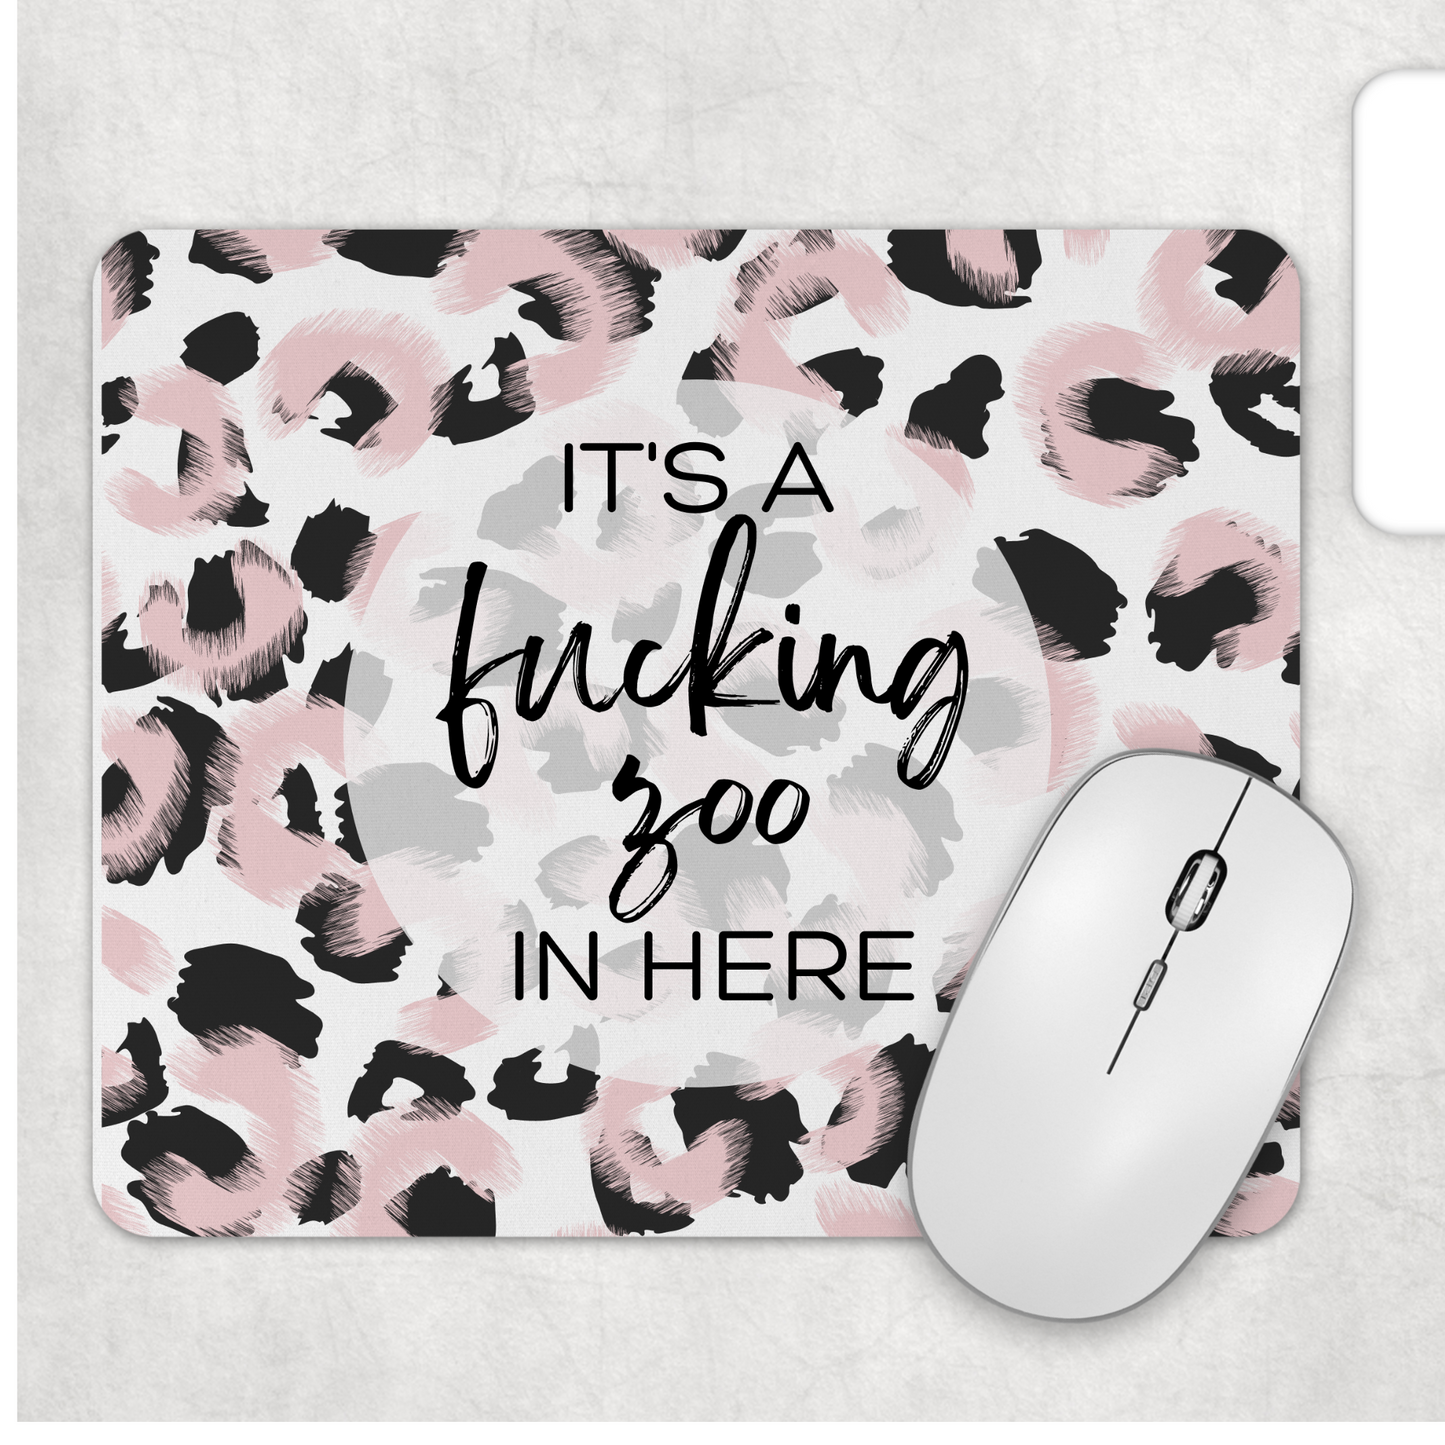 Mousepad: It's A Fucking Zoo In Here